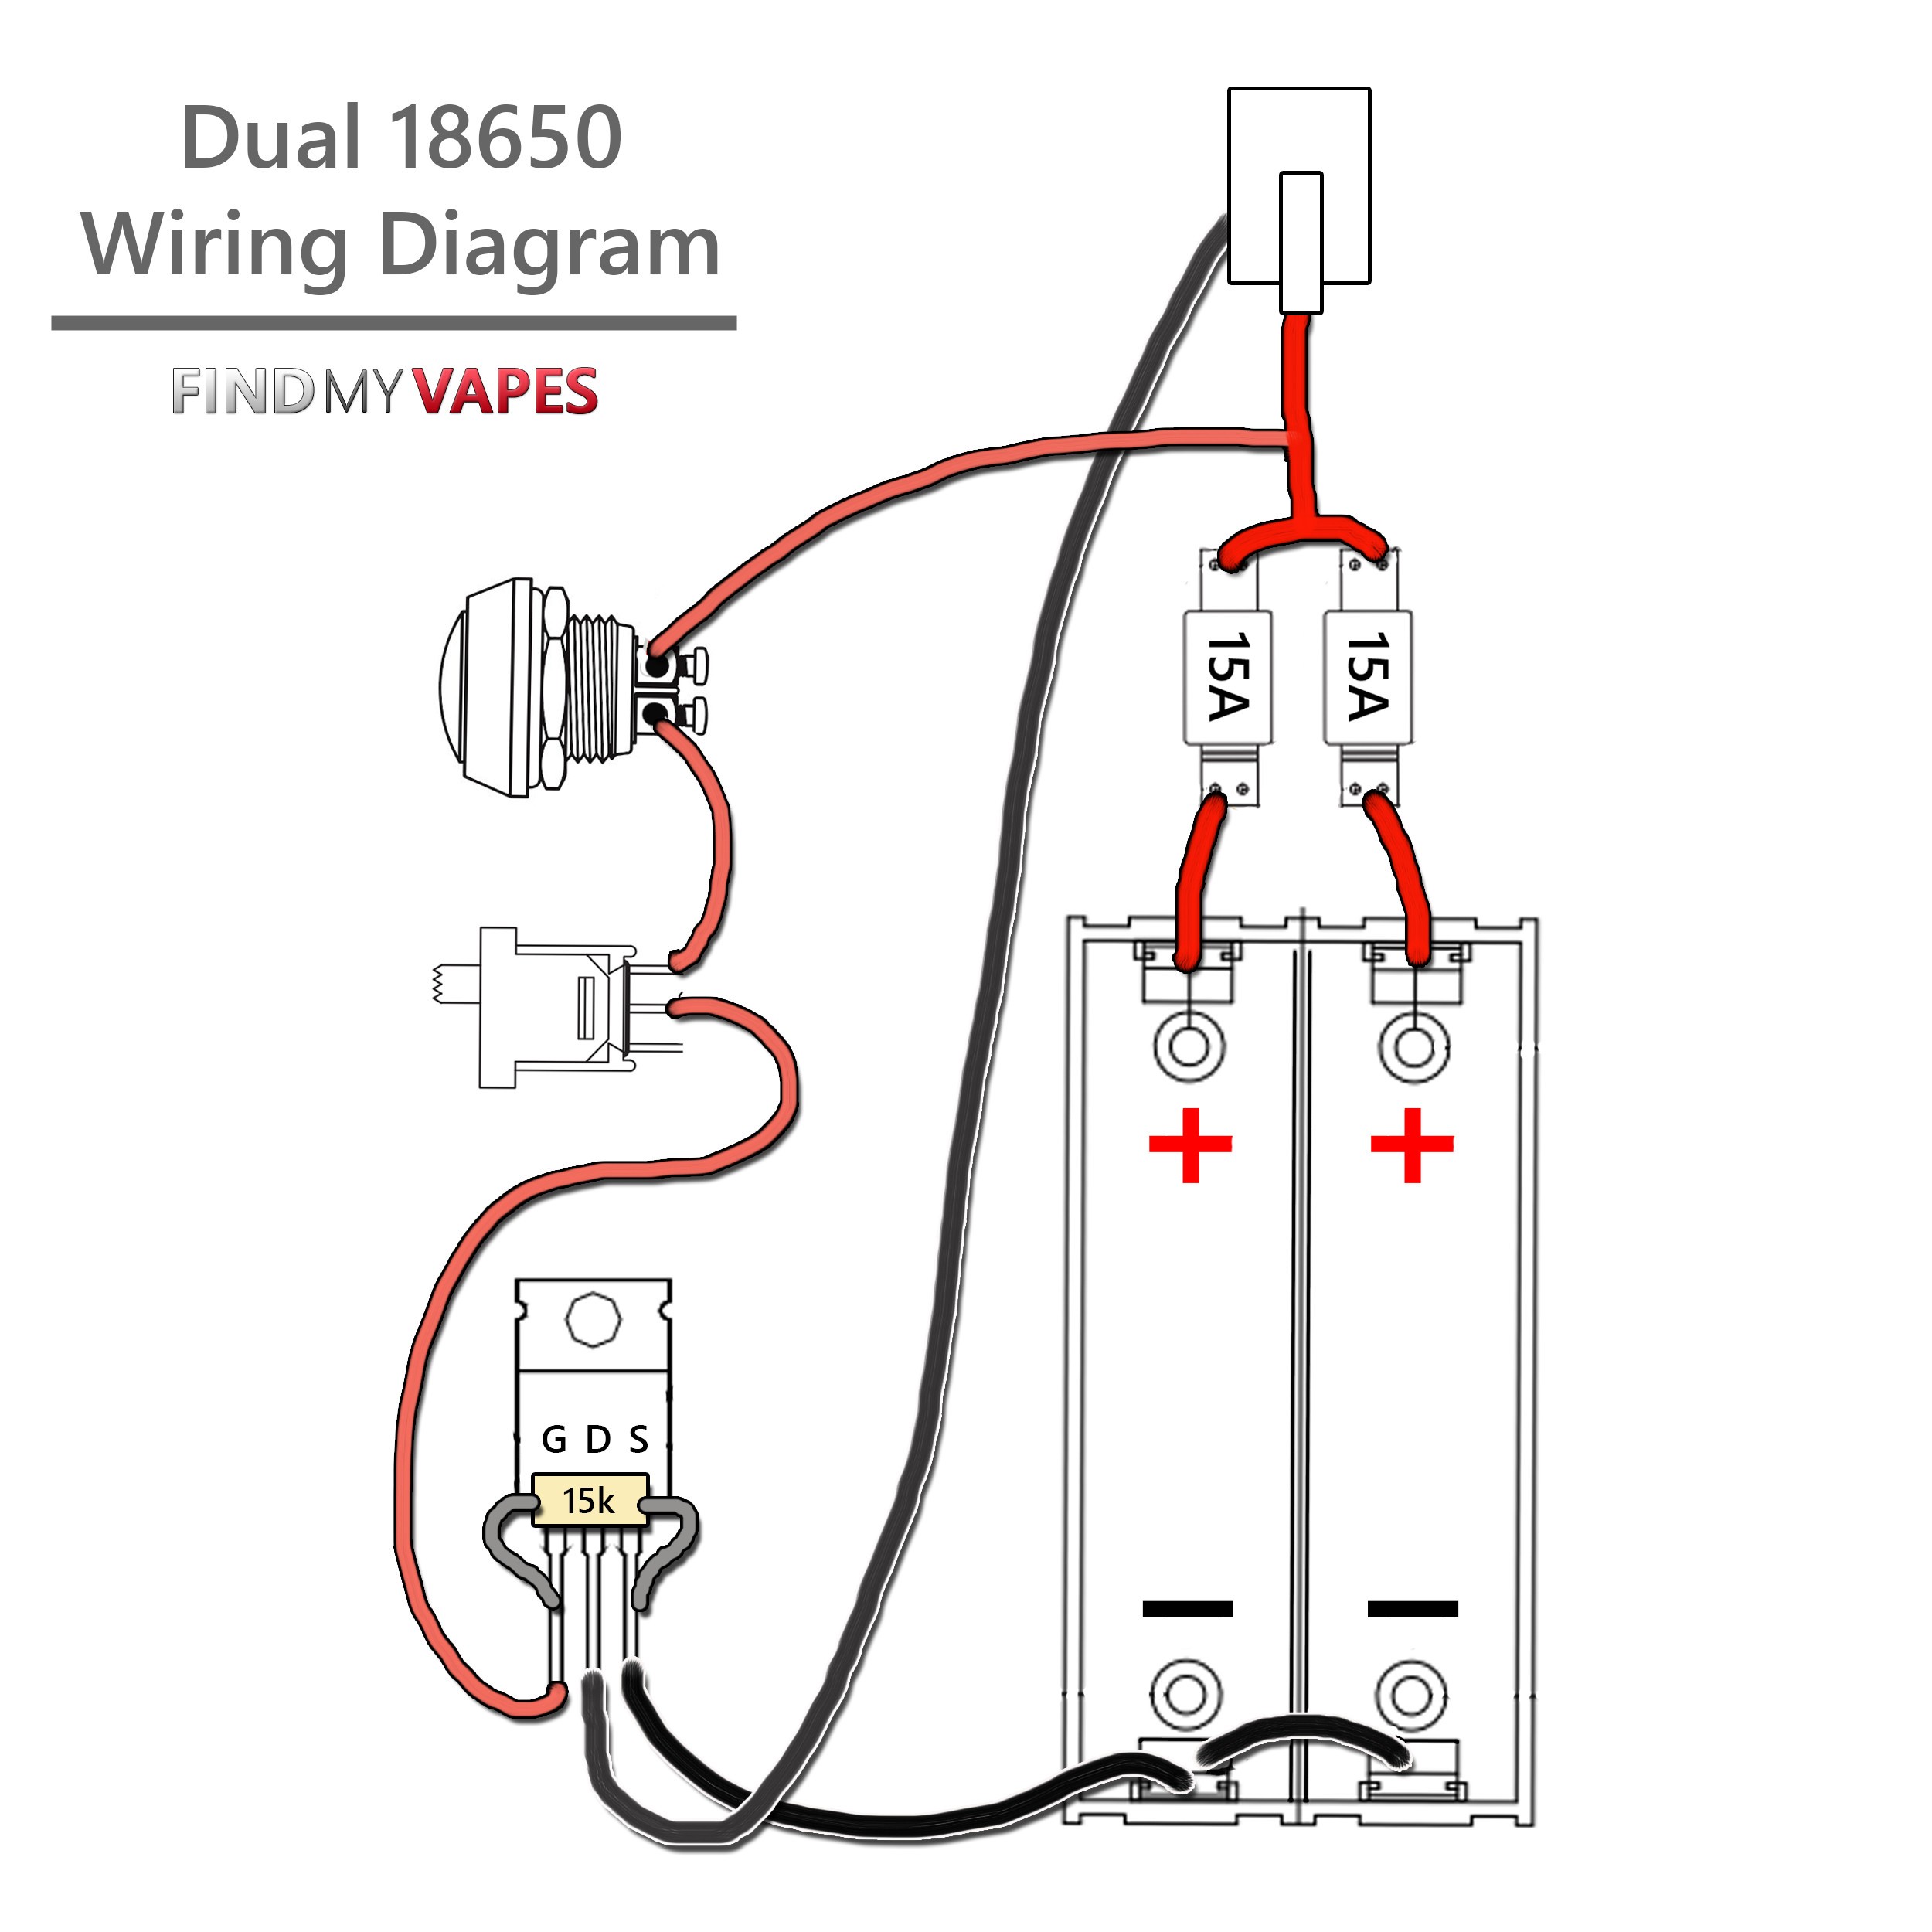 how to build unregulated dual box mod with mosfet findmyvapes rh justsayessto me Unregulated Box Mod Wiring Diagram Series Box Mod Diagram